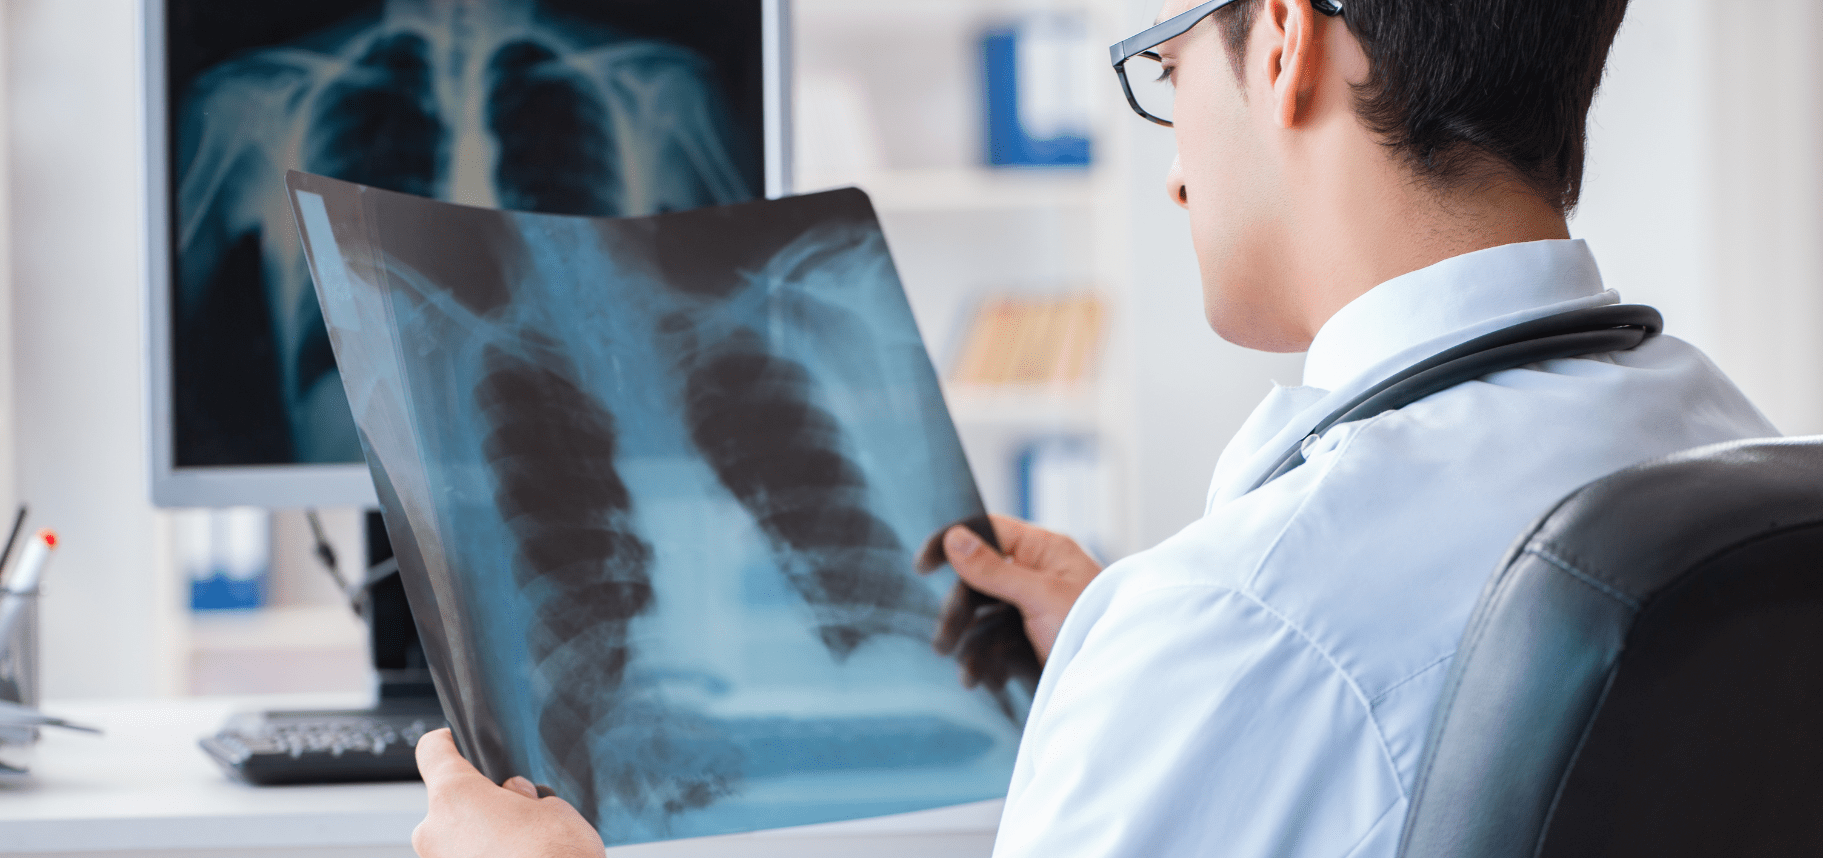 Male doctor reviewing x-rays for research purposes